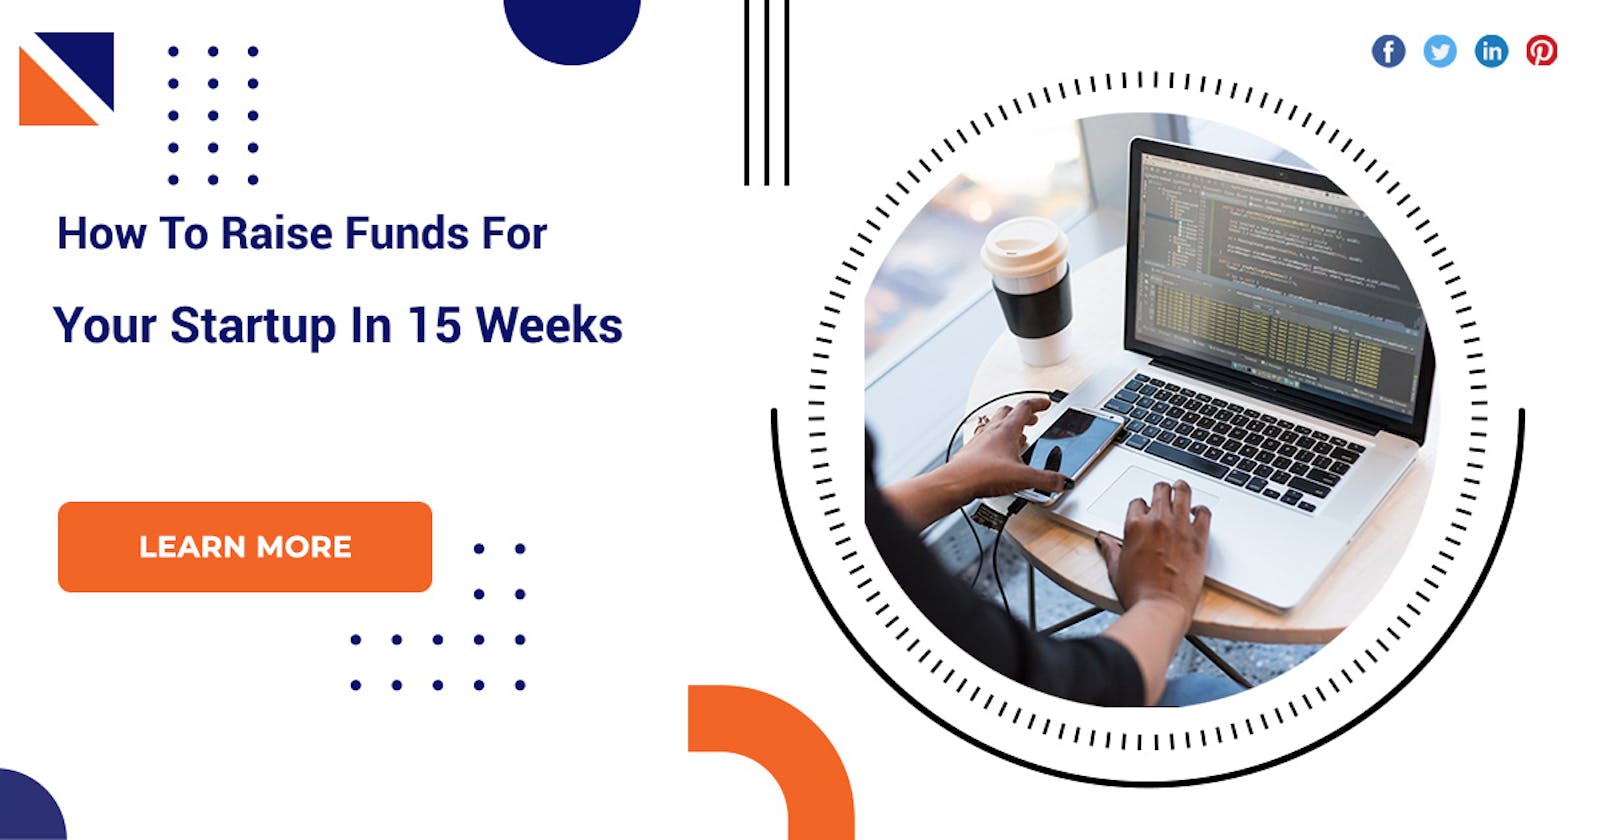 How To Raise Funds For Your Startup In 15 Weeks?